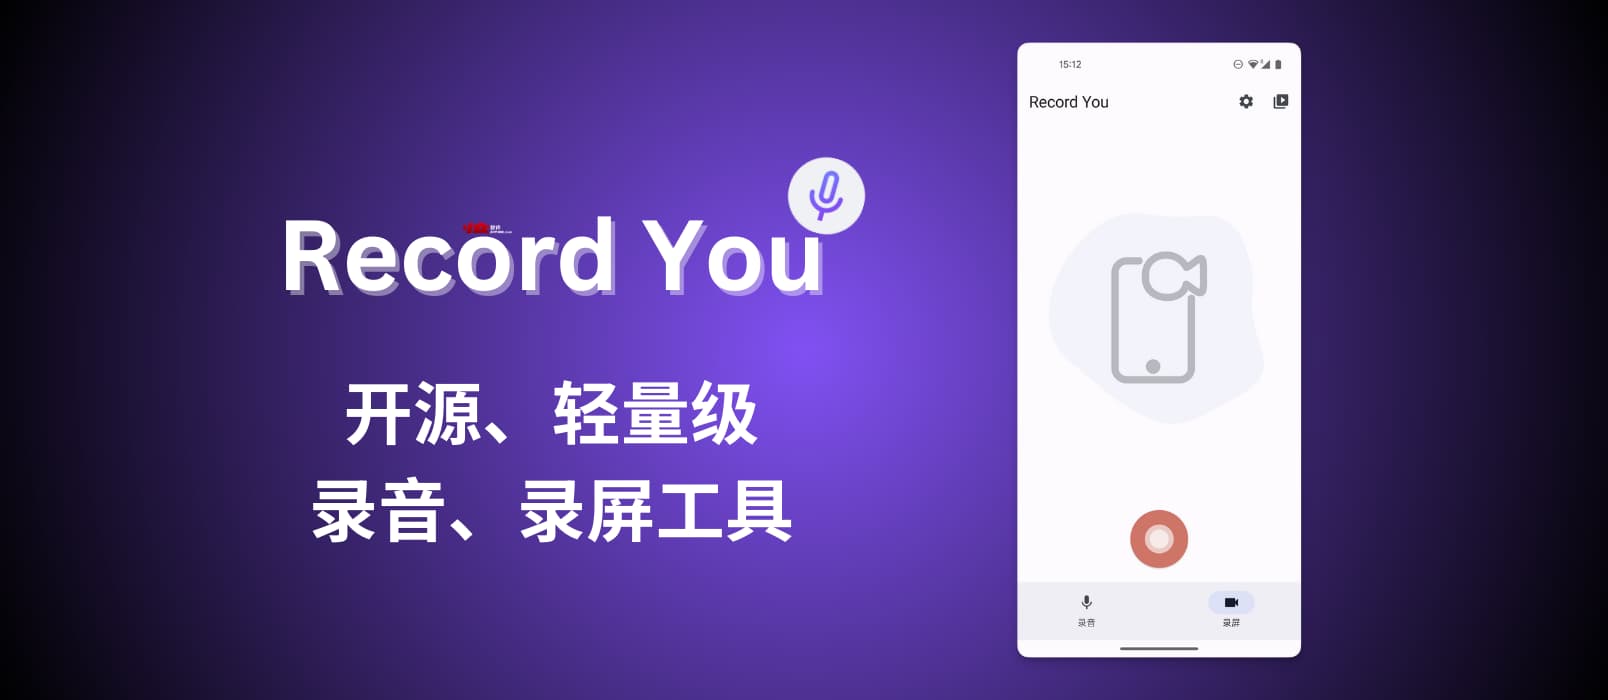 Record You – 开源、轻量级录音、录屏工具，Material Design 3 风格[Android]